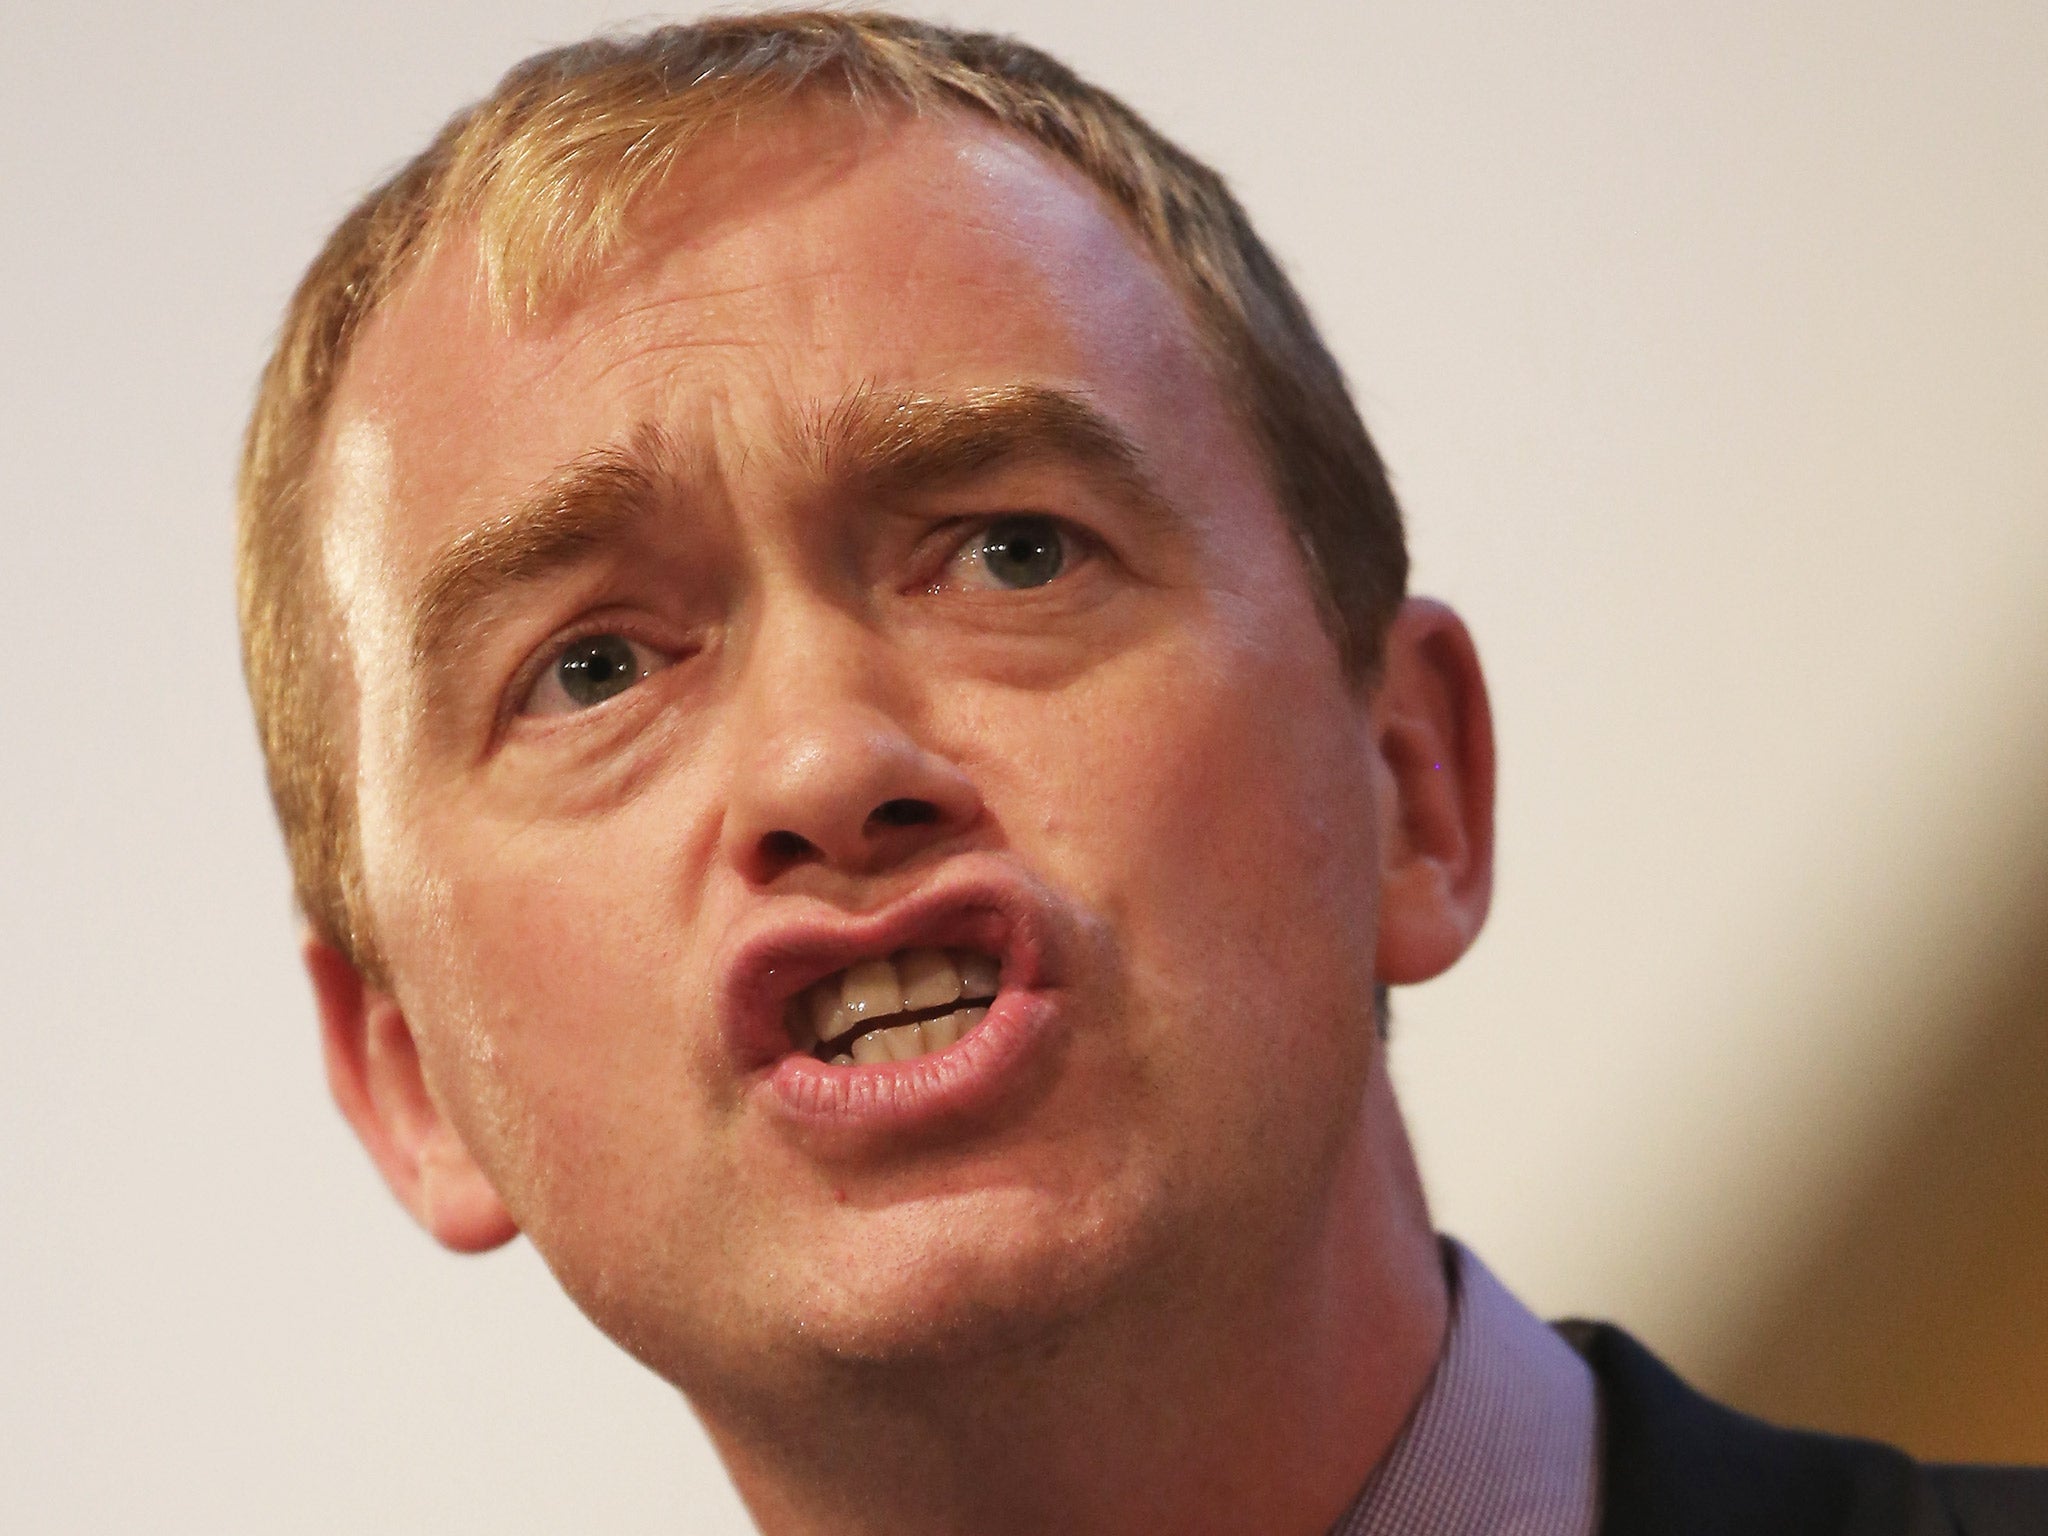 Tim Farron, the party's new leader